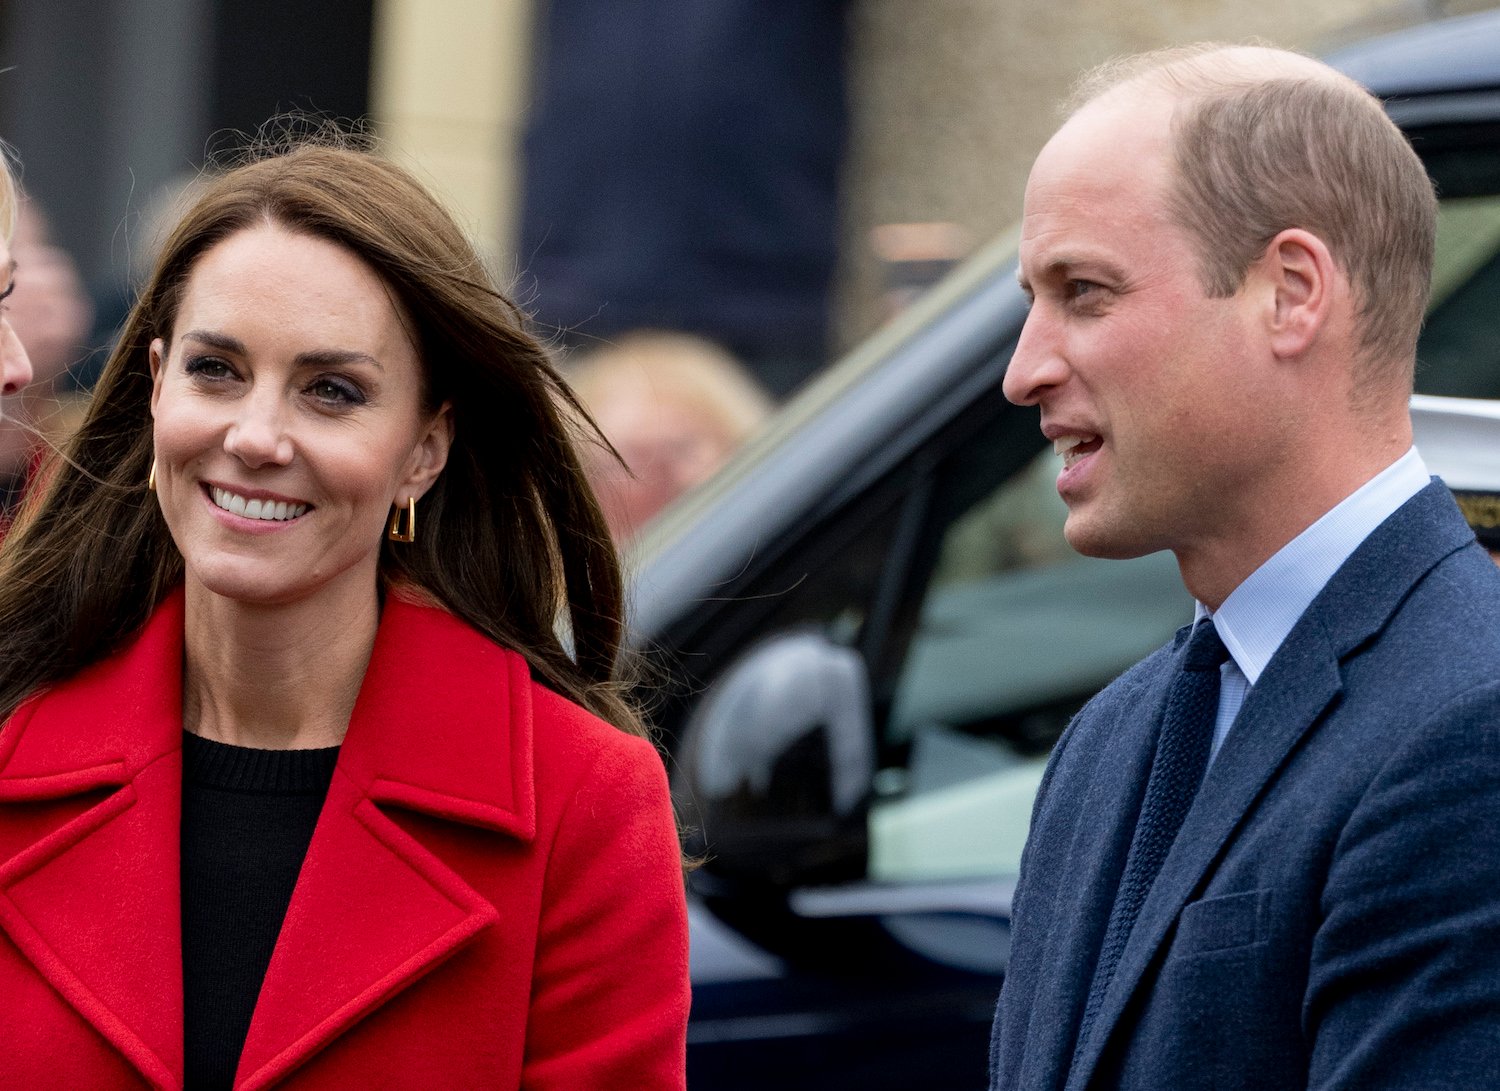 Kate Middleton wears a red coat and Prince William wears a suit and toes with the couple's body language revealing confidence